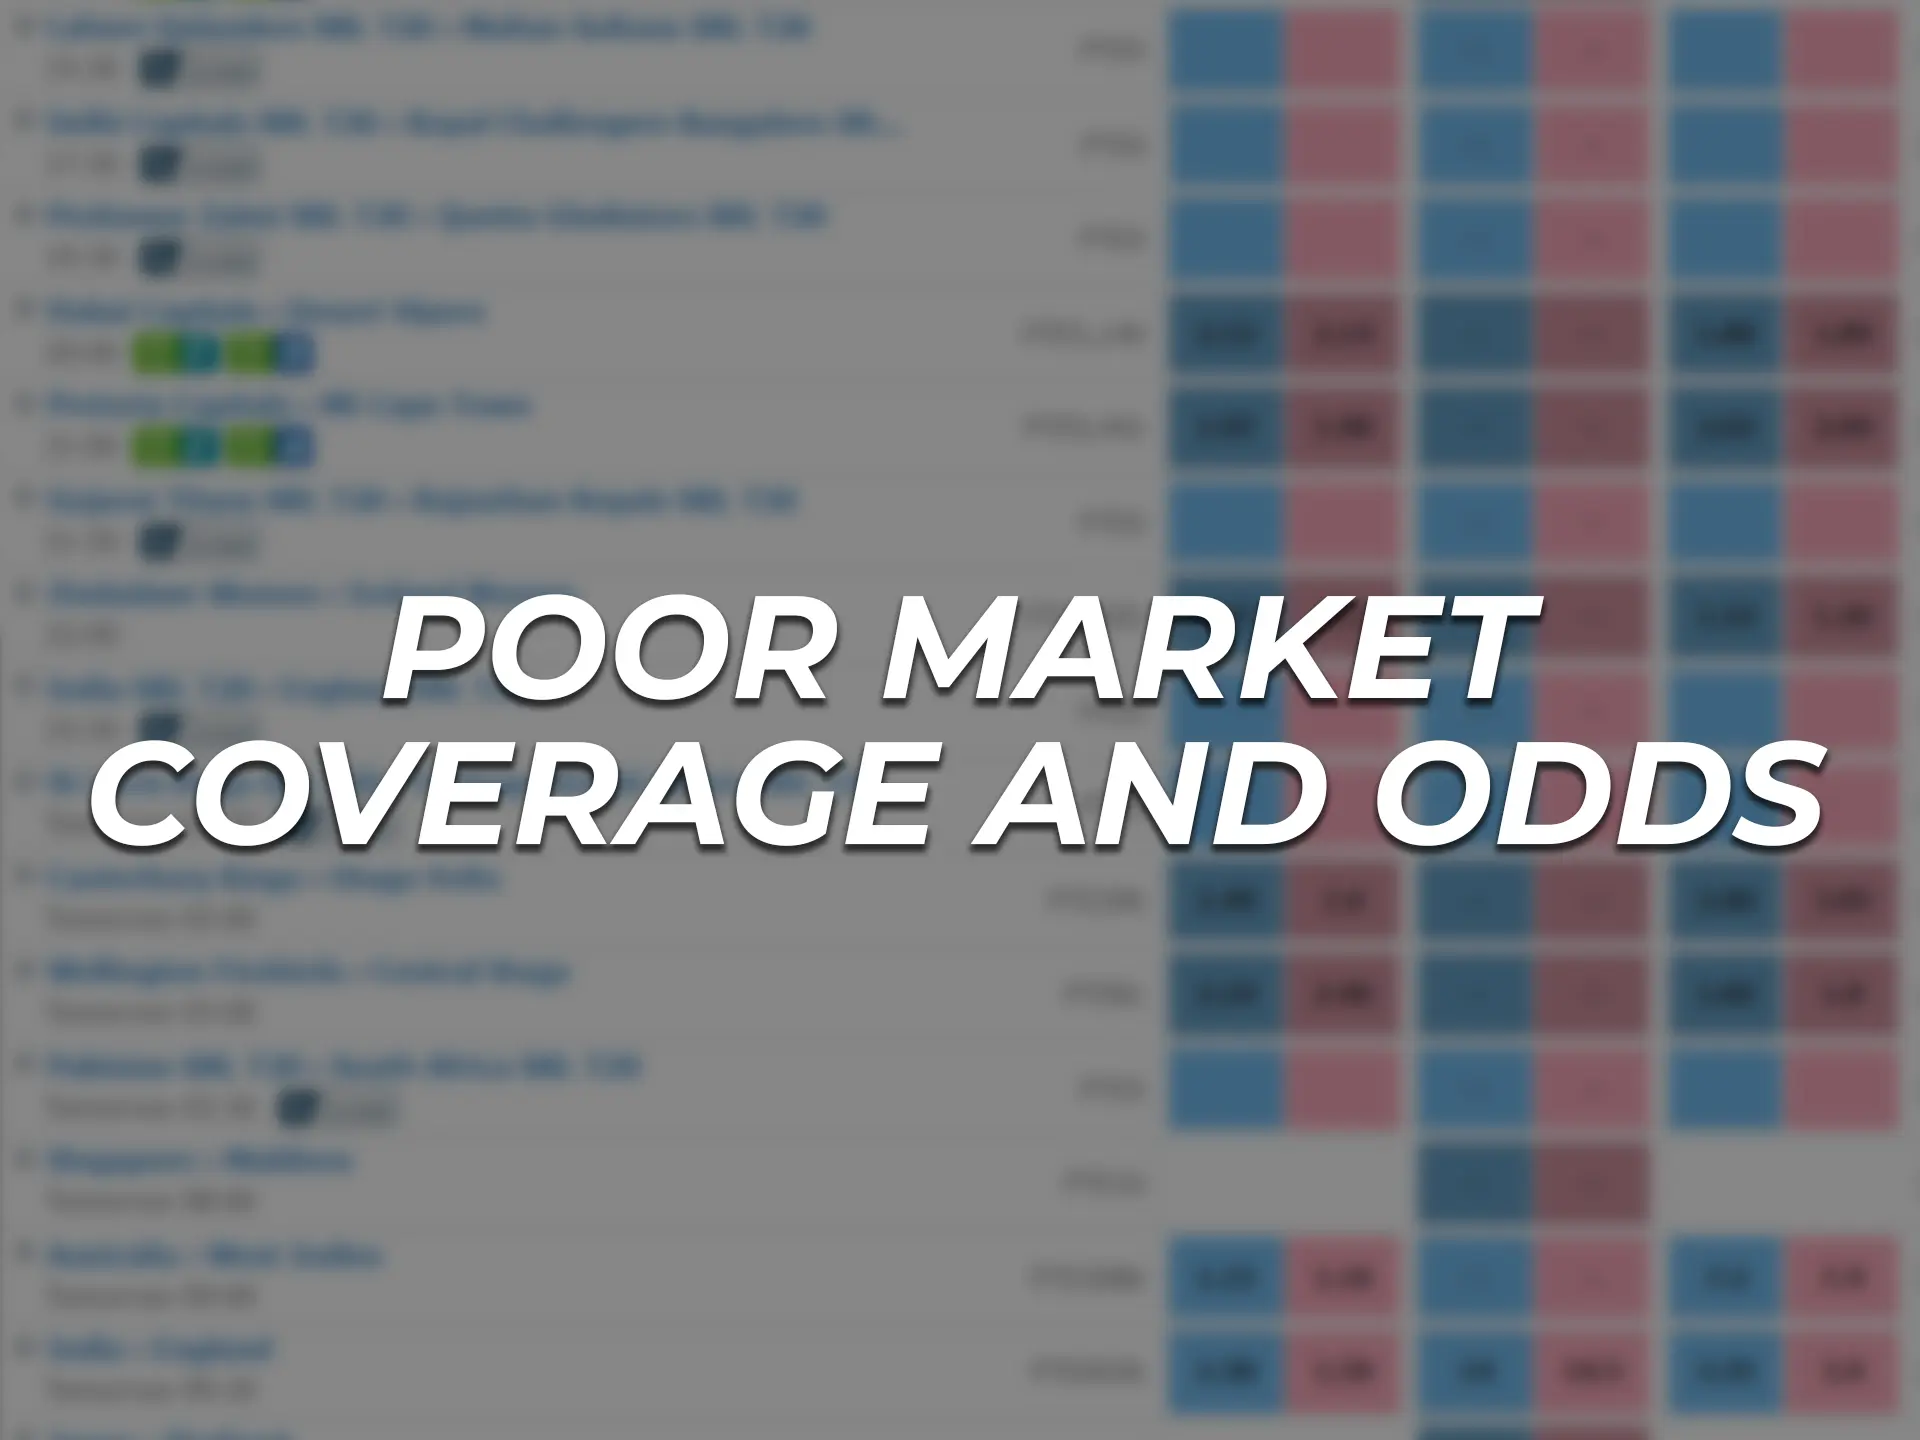 Pay attention to the competitive odds at each bookmaker.